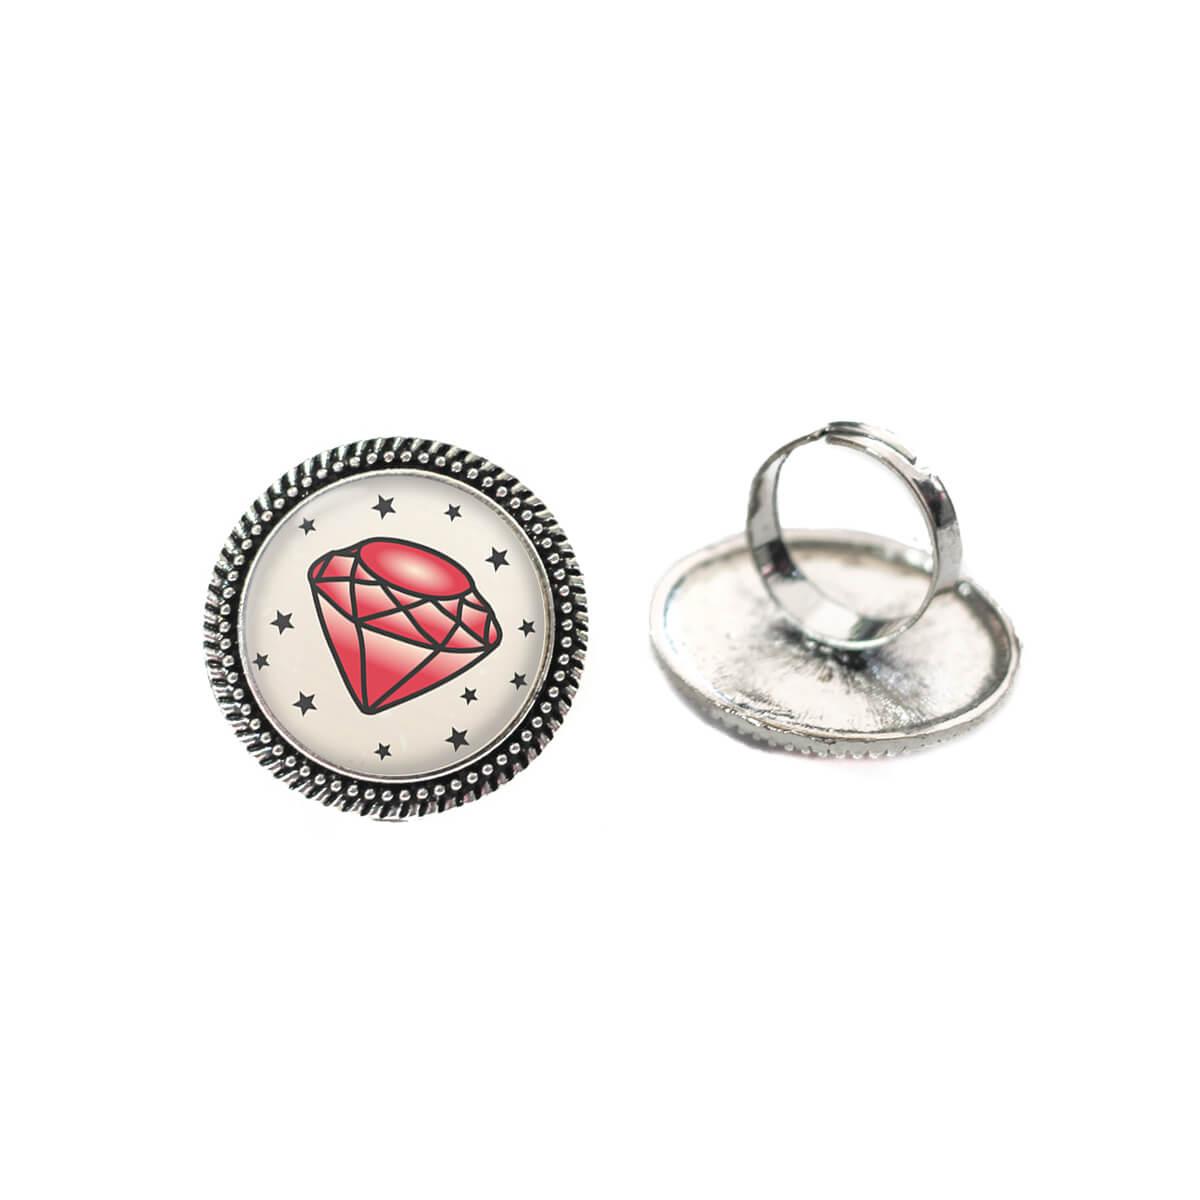 Double Red Diamond Logo - Traditonal Tattoo Red Diamond Glass 25mm Cabochon Silver Double Rope ...